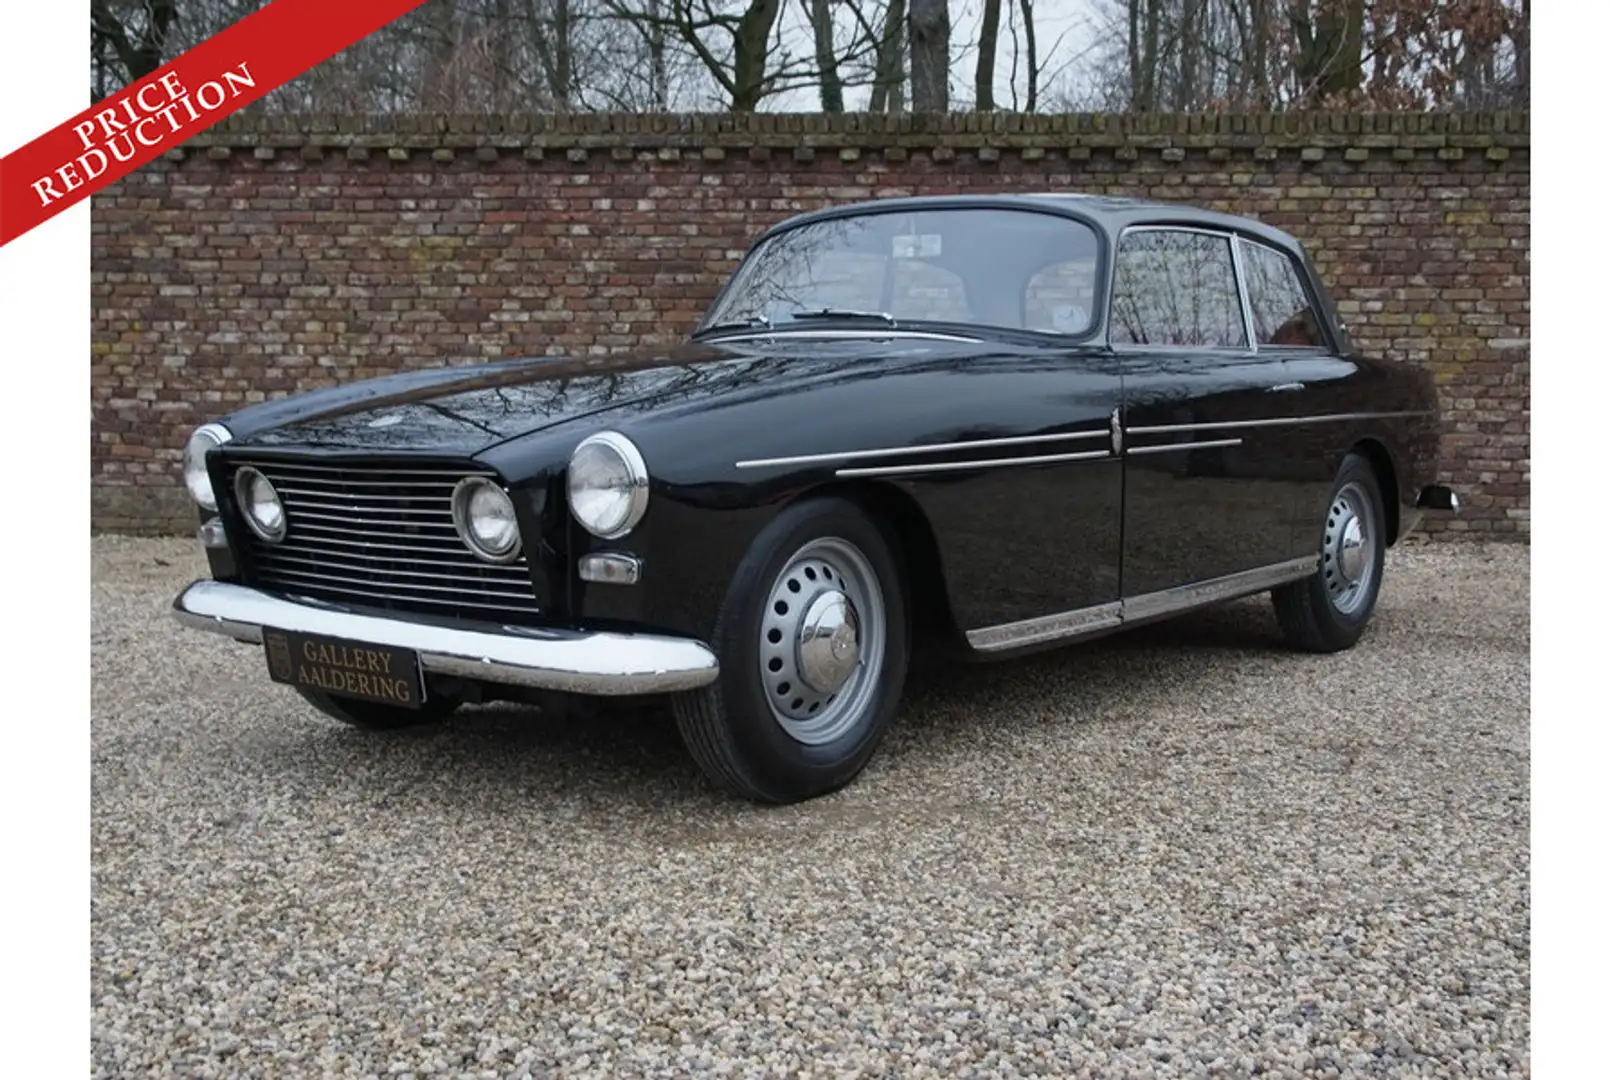 Bristol 408 Saloon PRICE REDUCTION One of only 83 examples mad Negro - 1